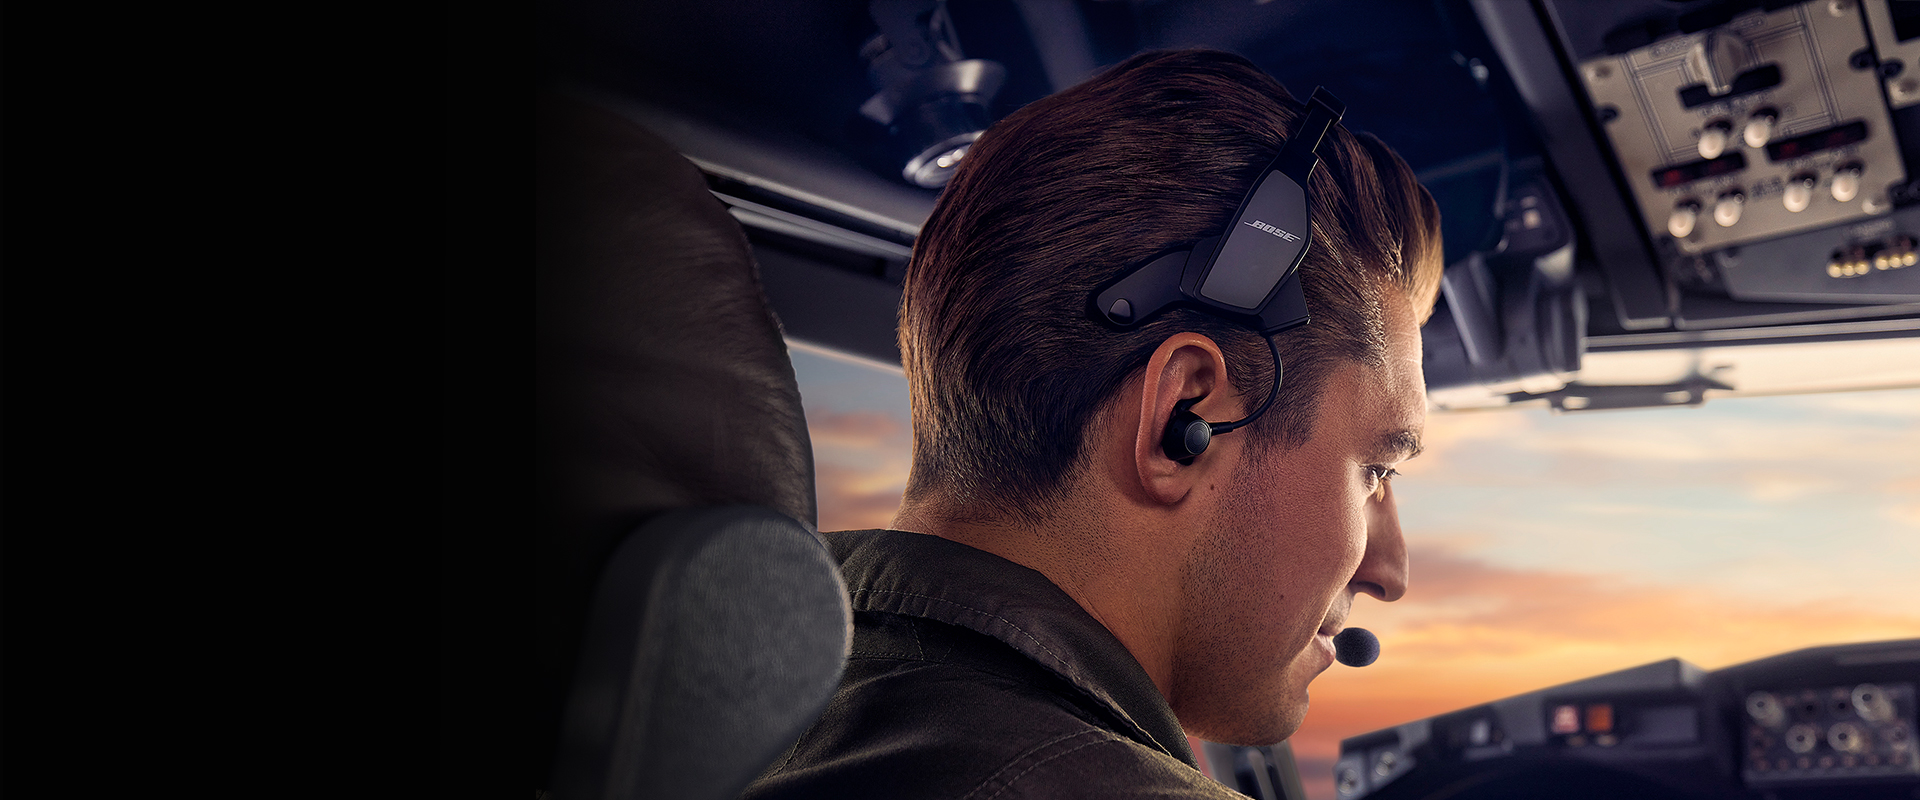 Pilot in the cockpit wearing Bose A30 Headset